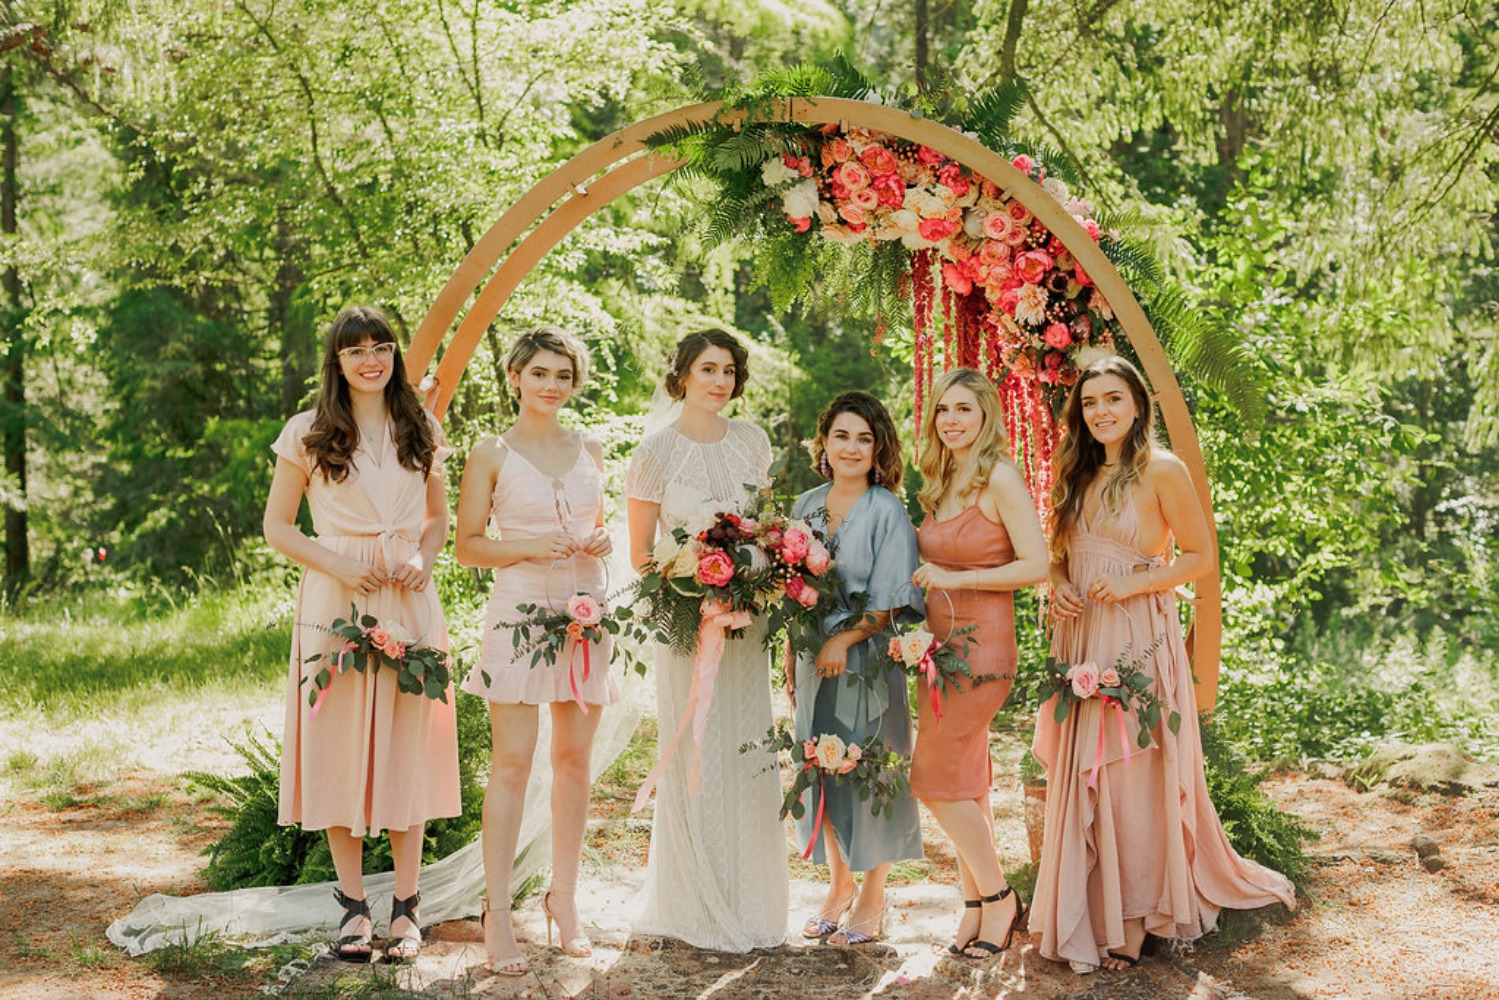 wedding bridesmaids in mismatched dresses